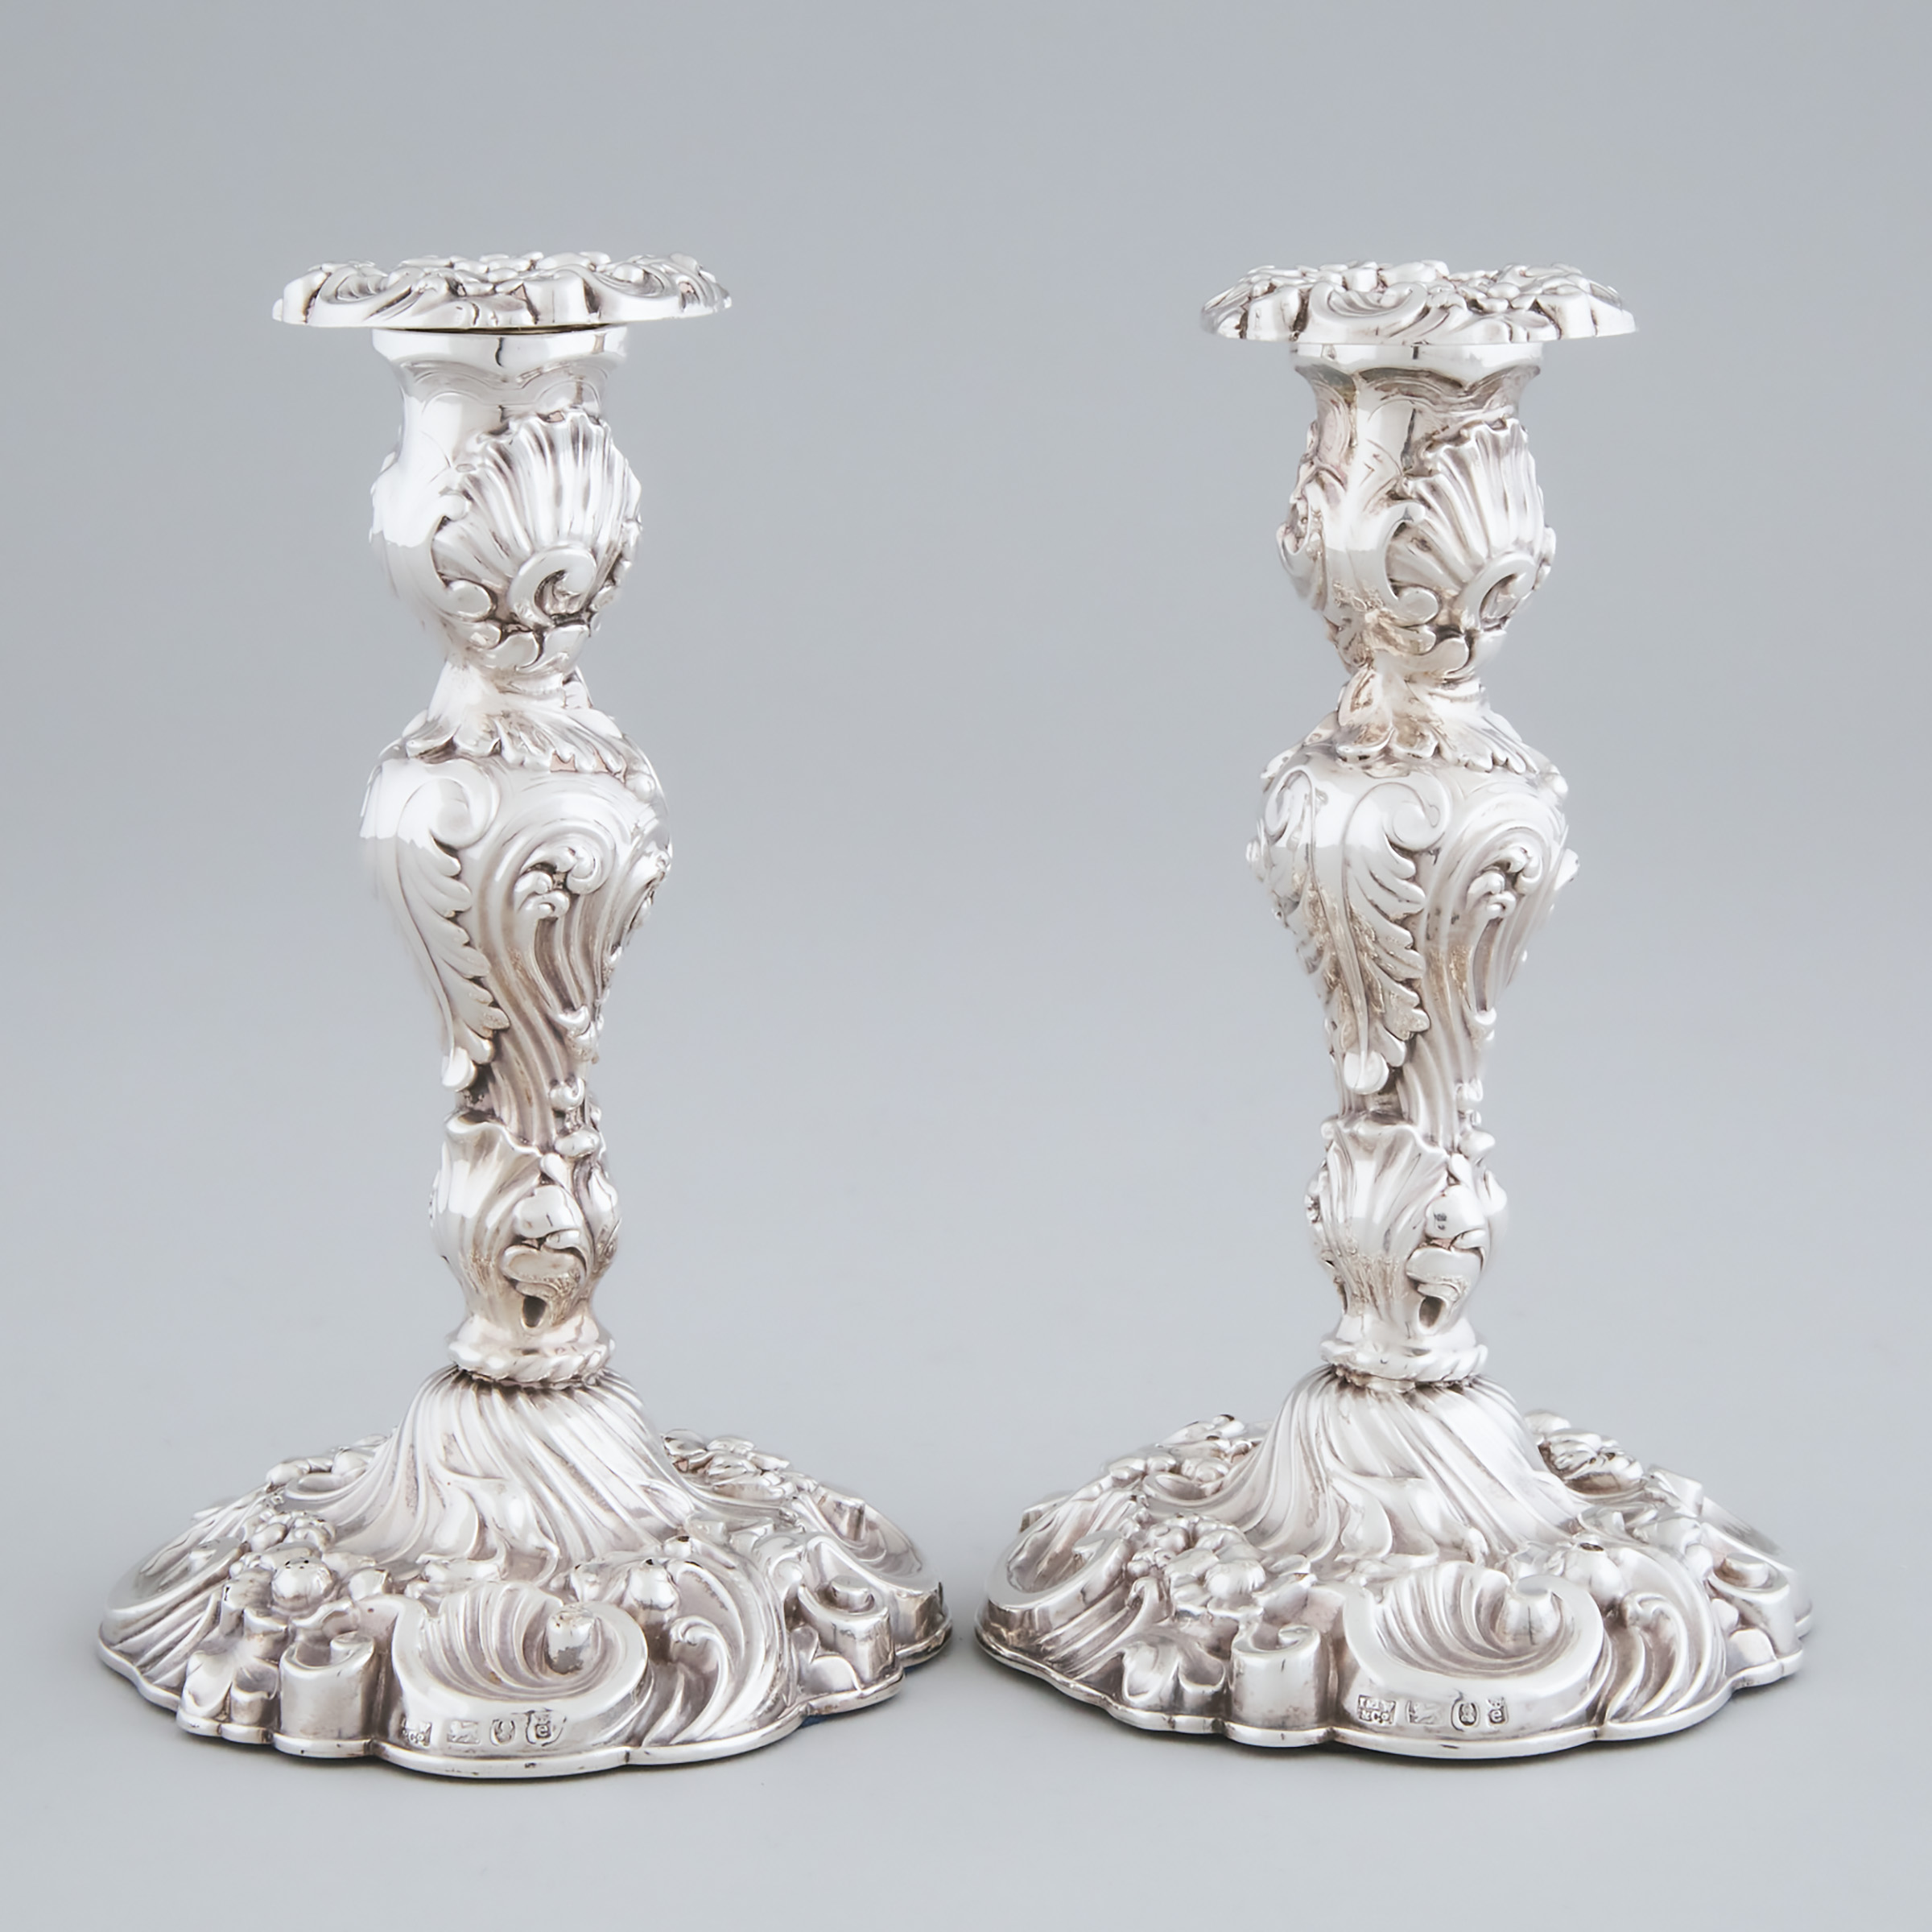 Pair of George IV Silver Candlesticks  2a5676